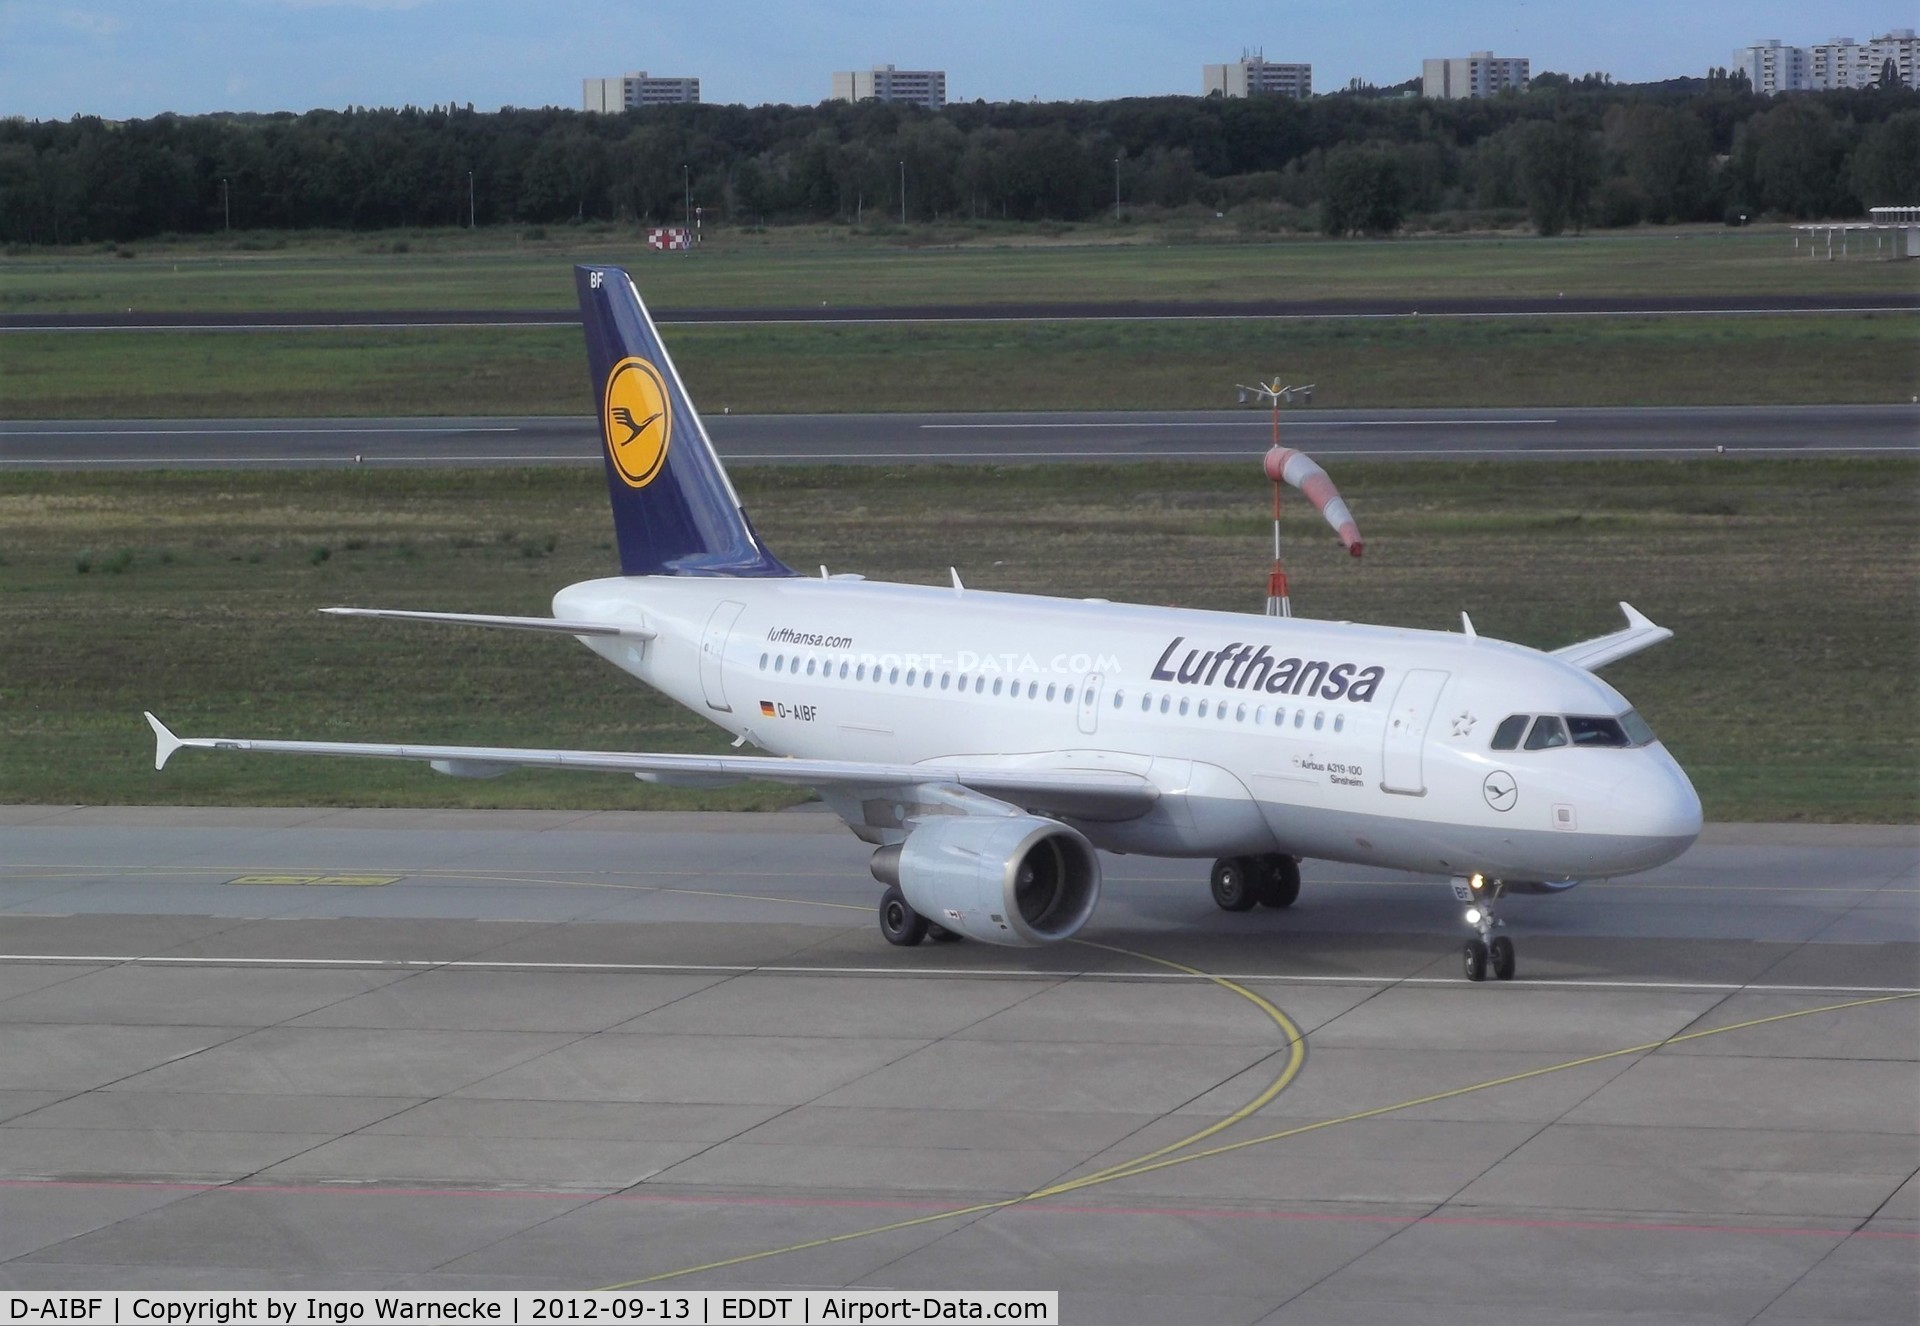 D-AIBF, 2011 Airbus A319-112 C/N 4796, Airbus A319-112 of Lufthansa at Berlin-Tegel airport